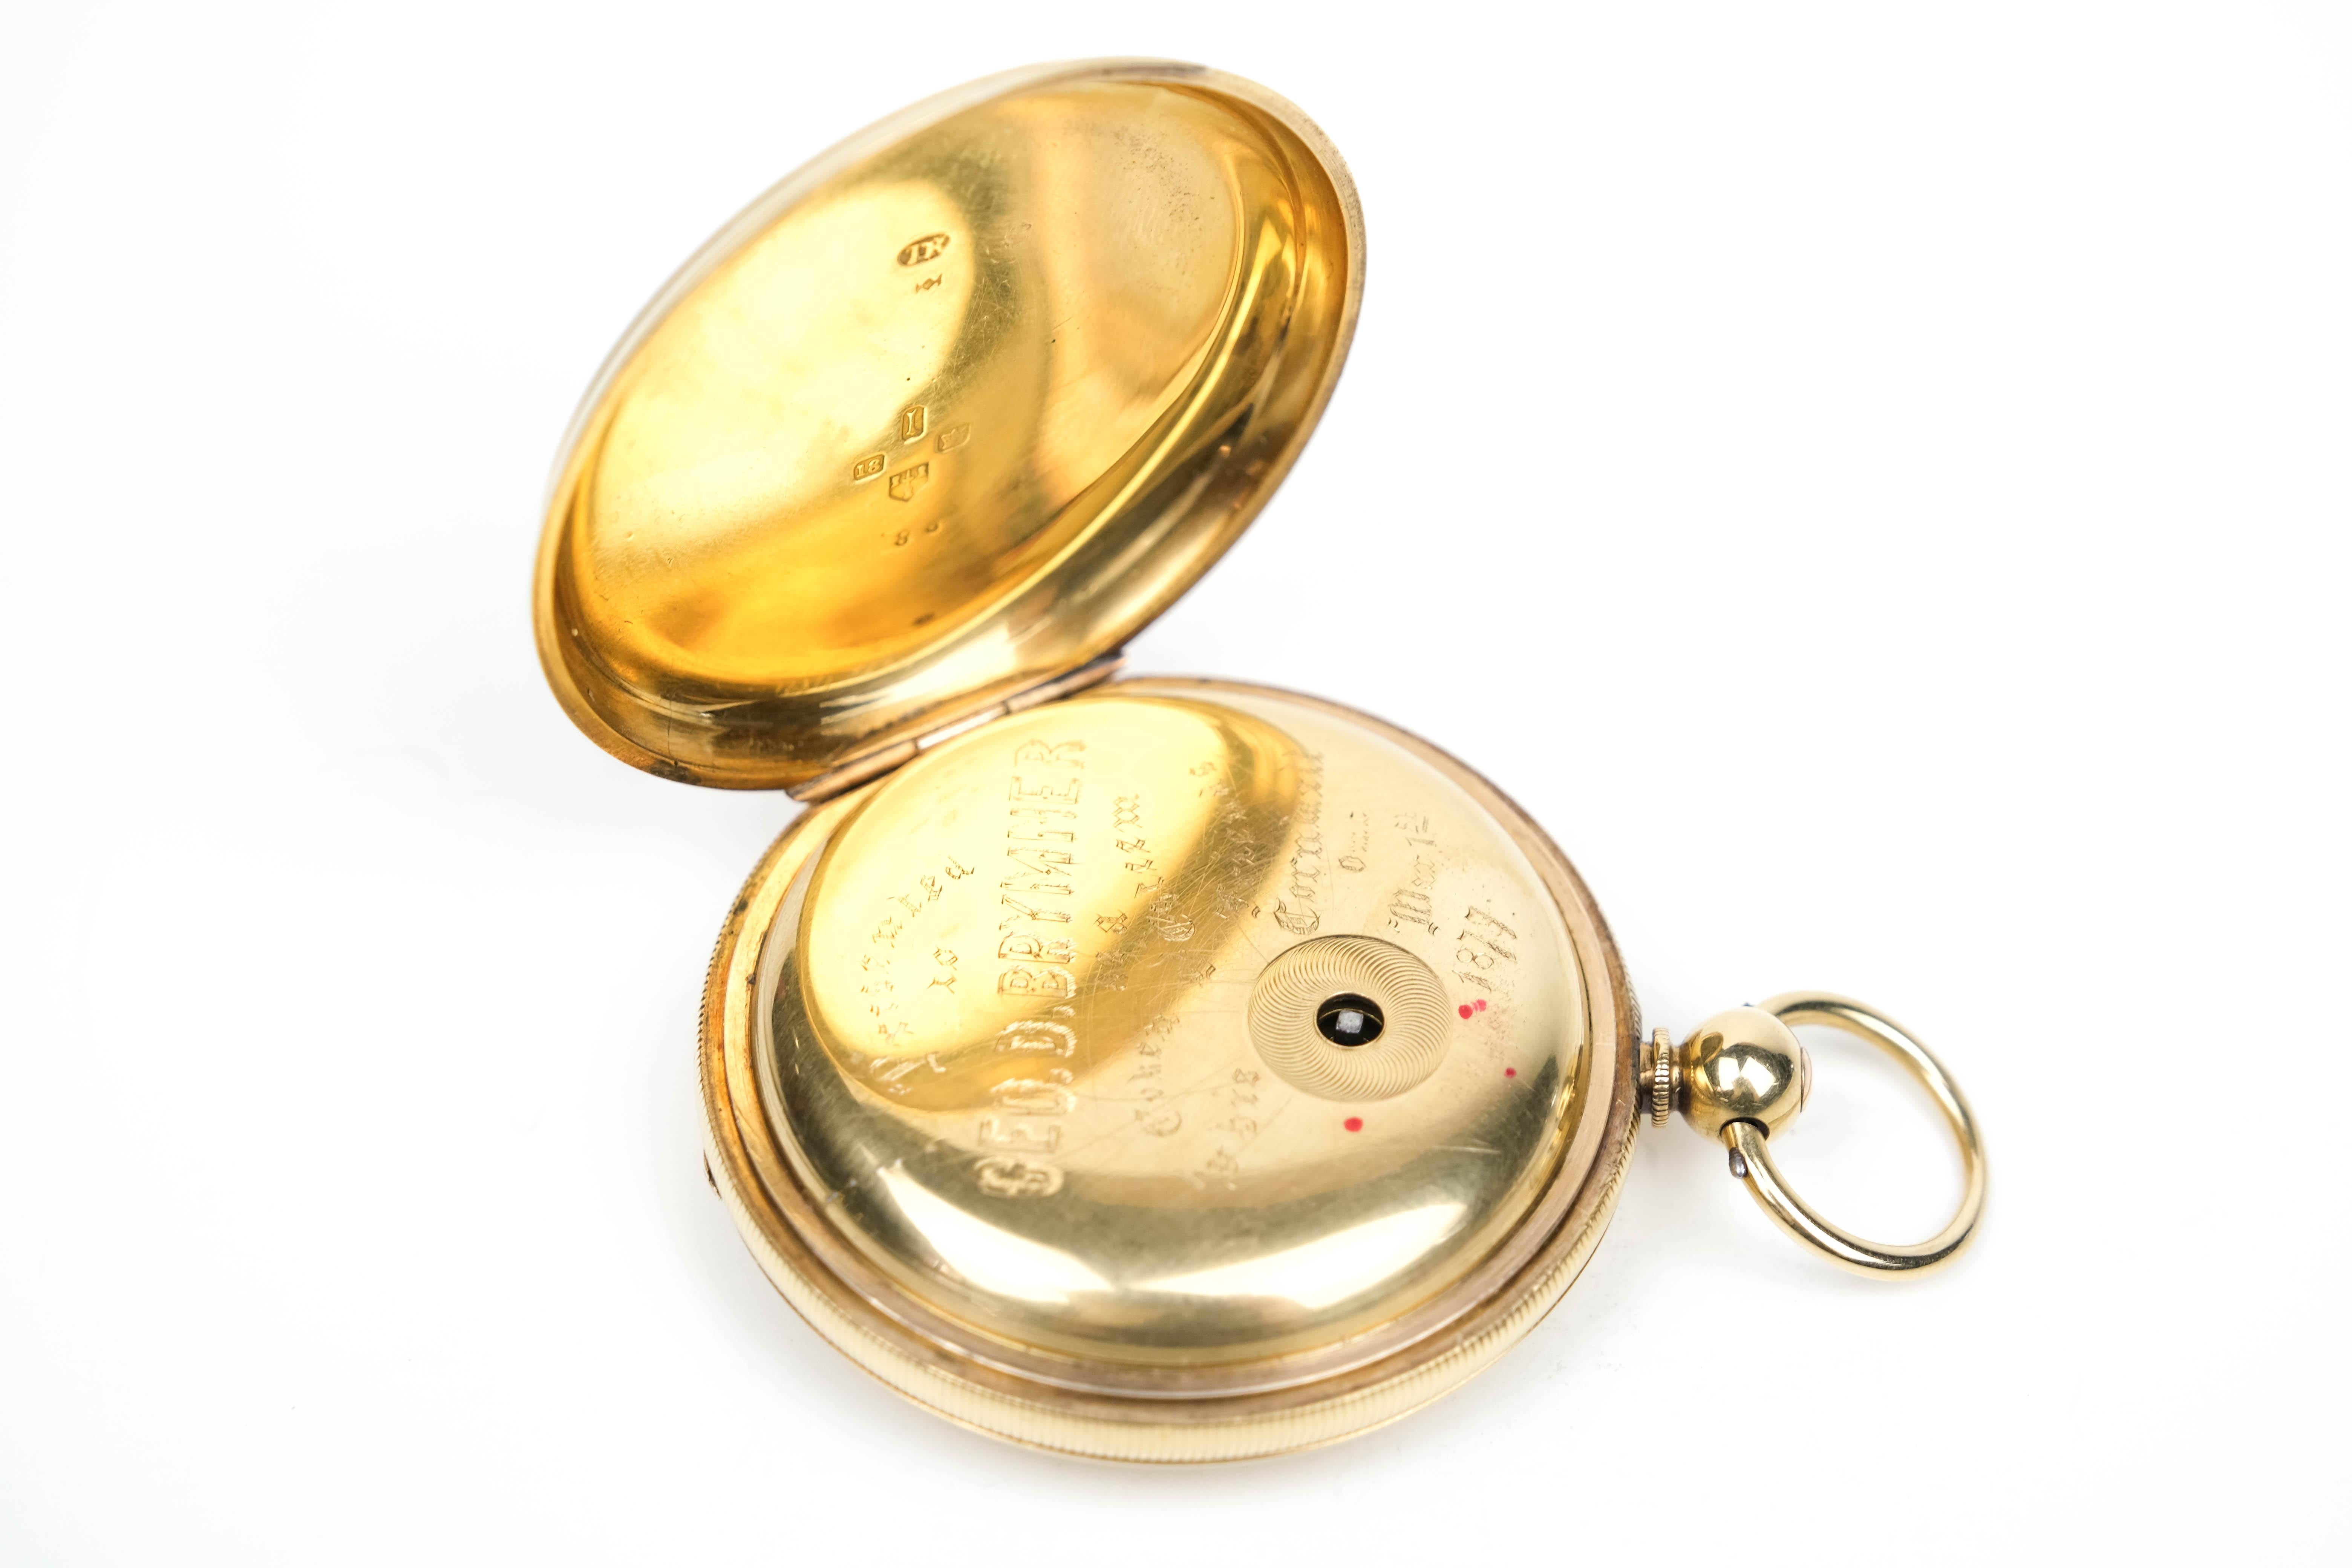 18 Karat Thos. Russel and Son Pocket Watch In Good Condition For Sale In Bradford, Ontario